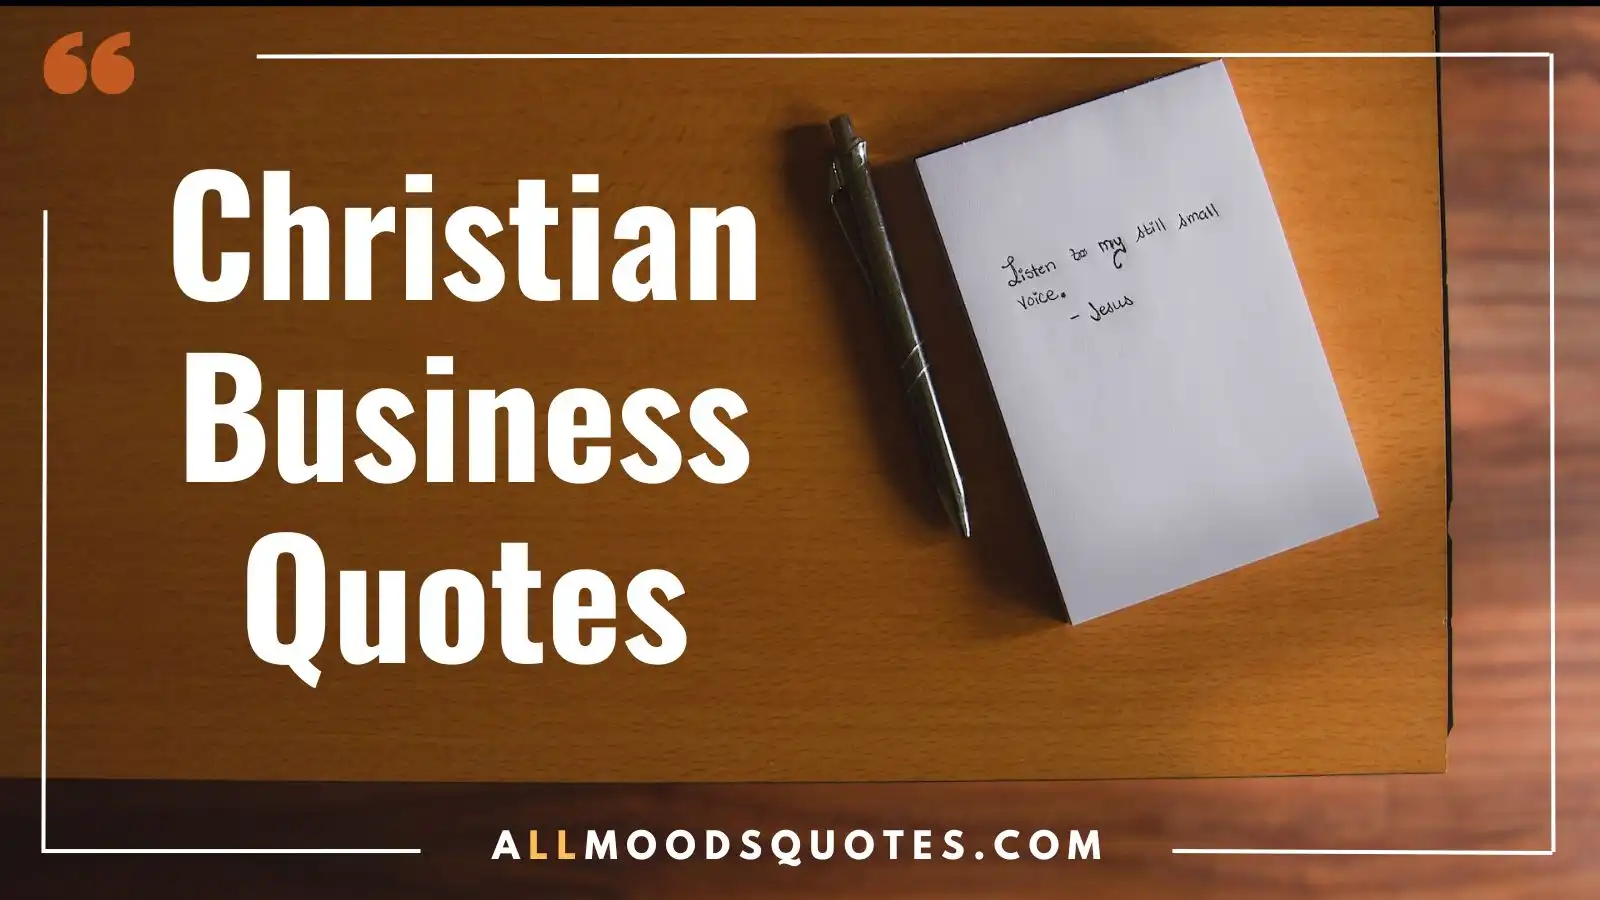 Christian Business Quotes (1)